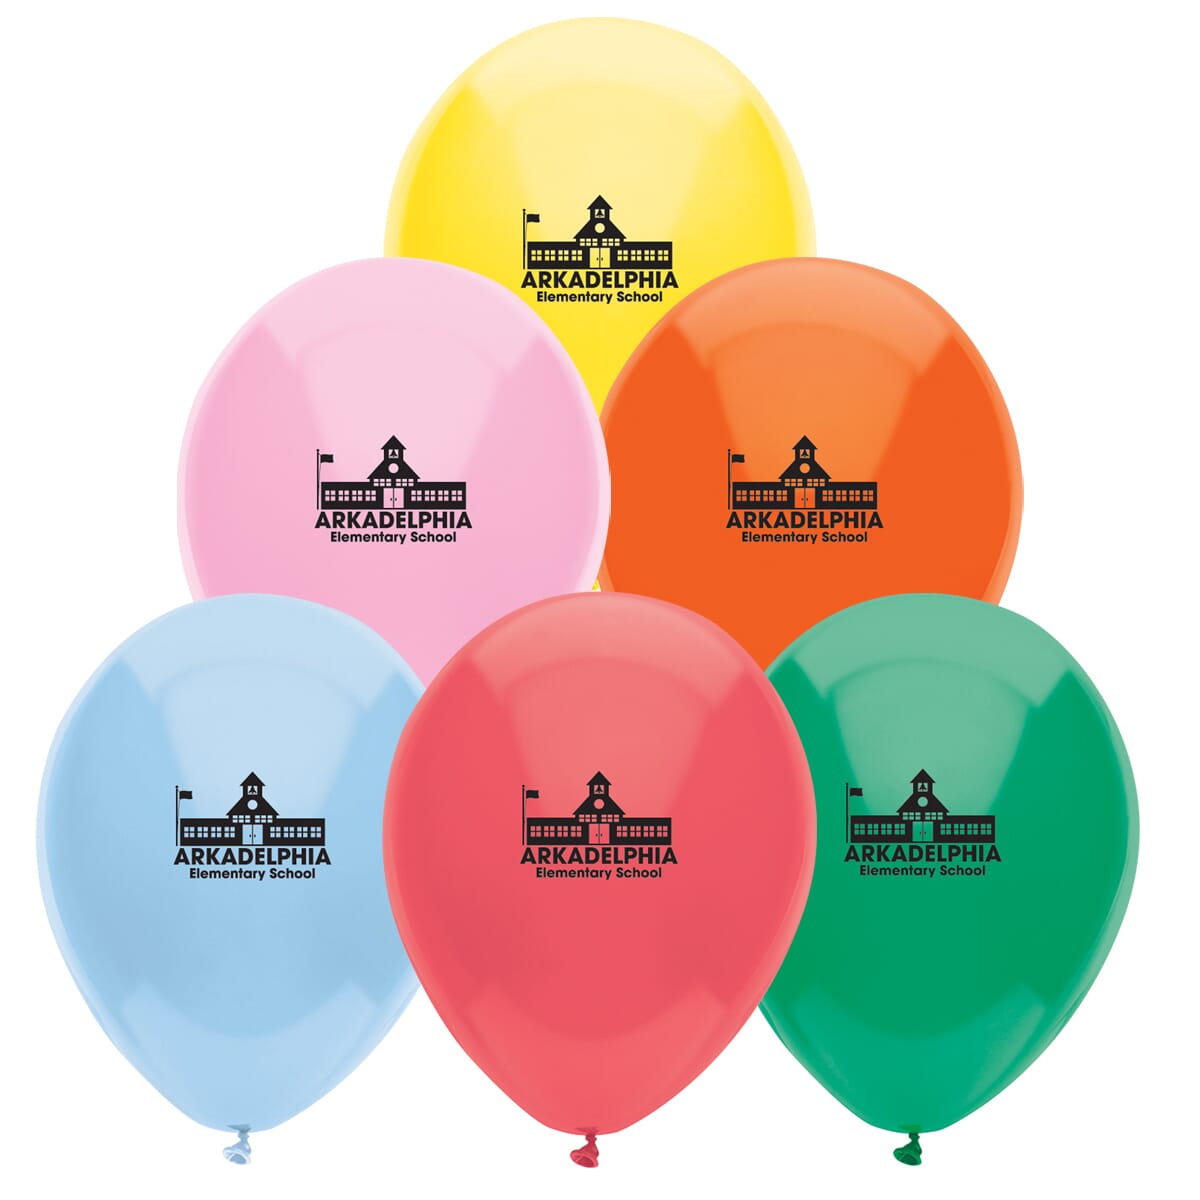 Group of colorful balloons with school logo